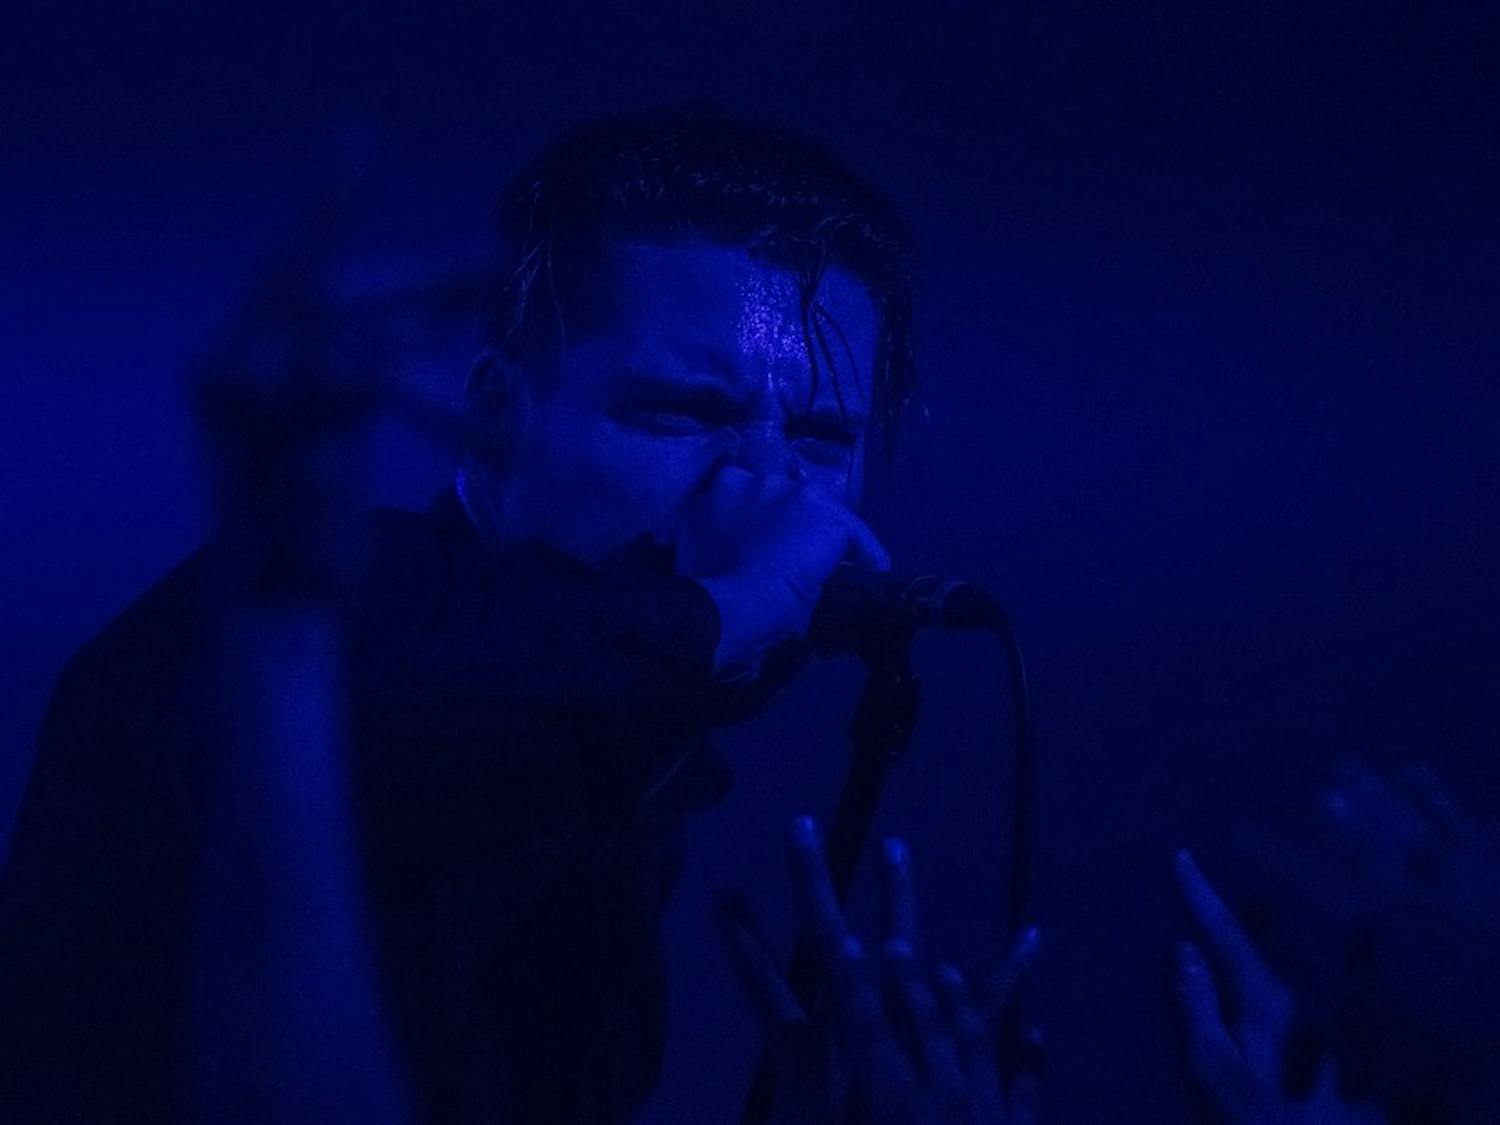 Deafheaven performs songs from their newest album 'New Bermuda' on Wednesday, Nov. 18, 2015, at Crescent Ballroom in Phoenix.